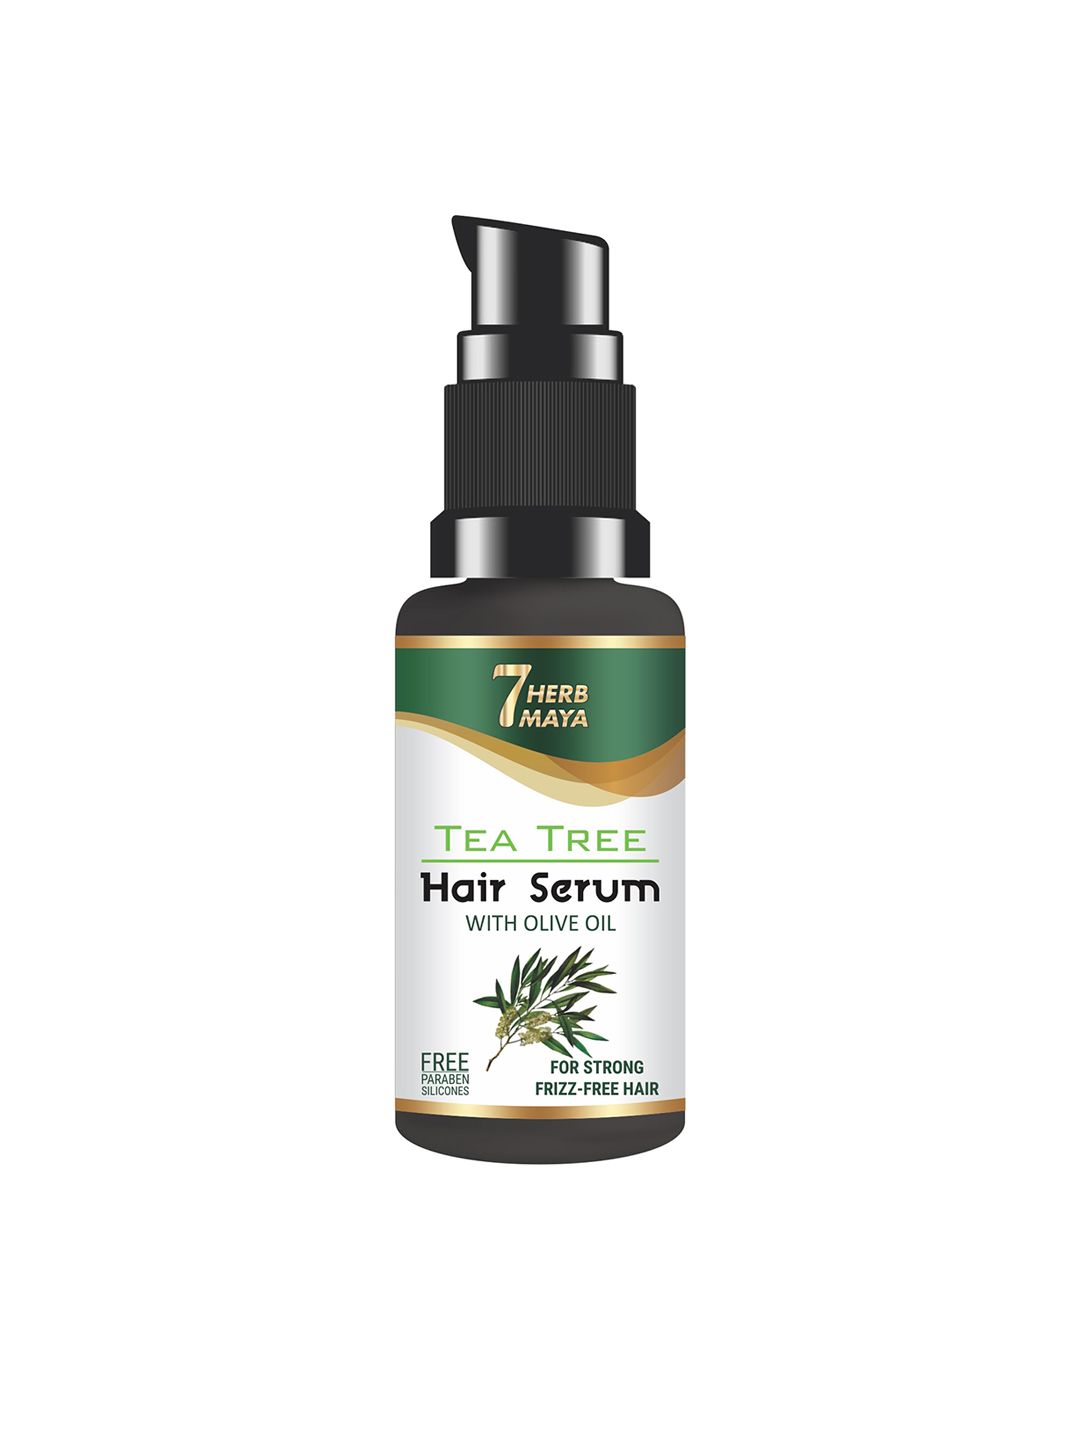 7Herbmaya Tea Tree Hair Serum with Olive Oil for Strong Frizz-Free Hair - 30 ml Price in India